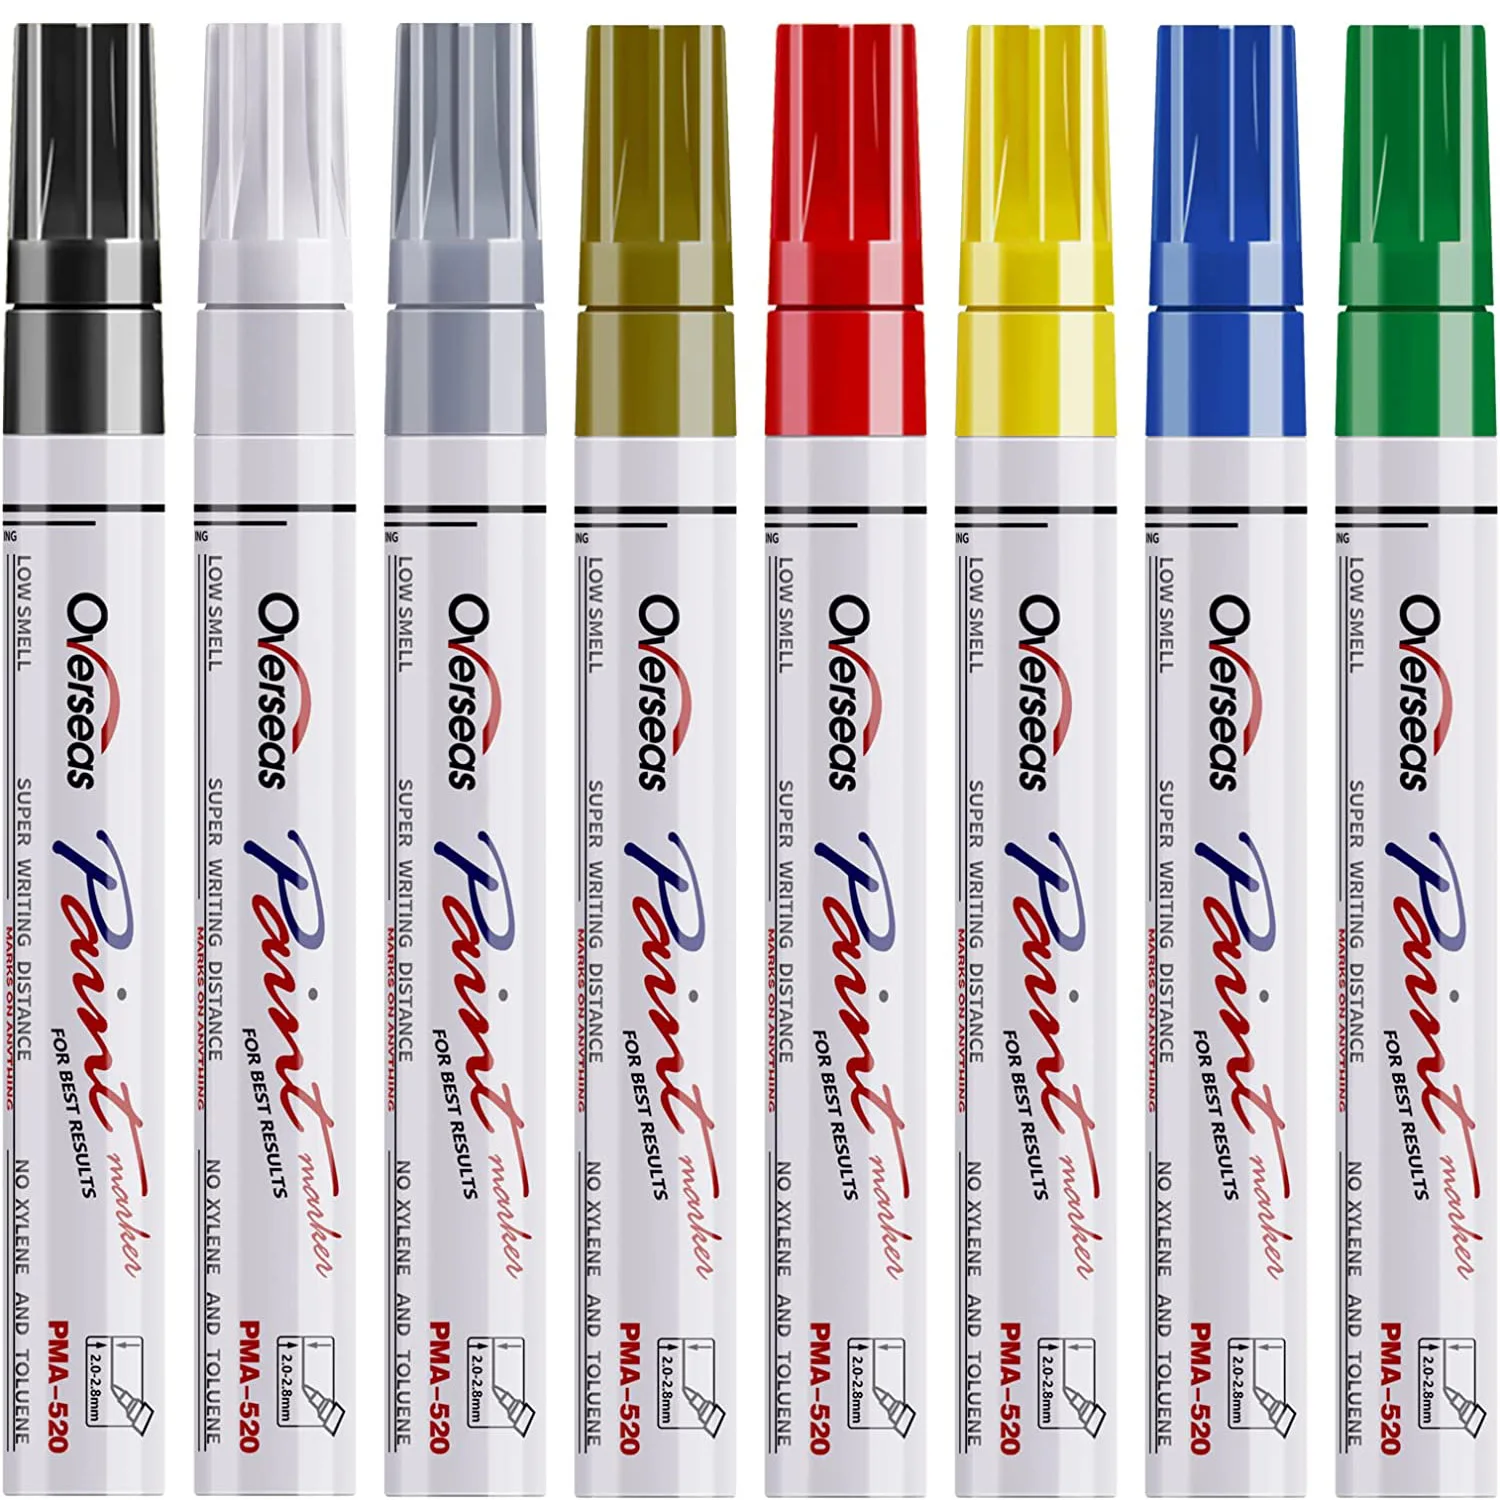 

Paint Marker Pens 8 Colors Oil Based Paint Markers Permanent Waterproof Quick Dry Medium Tip, Assorted Color Paint Pen for Metal